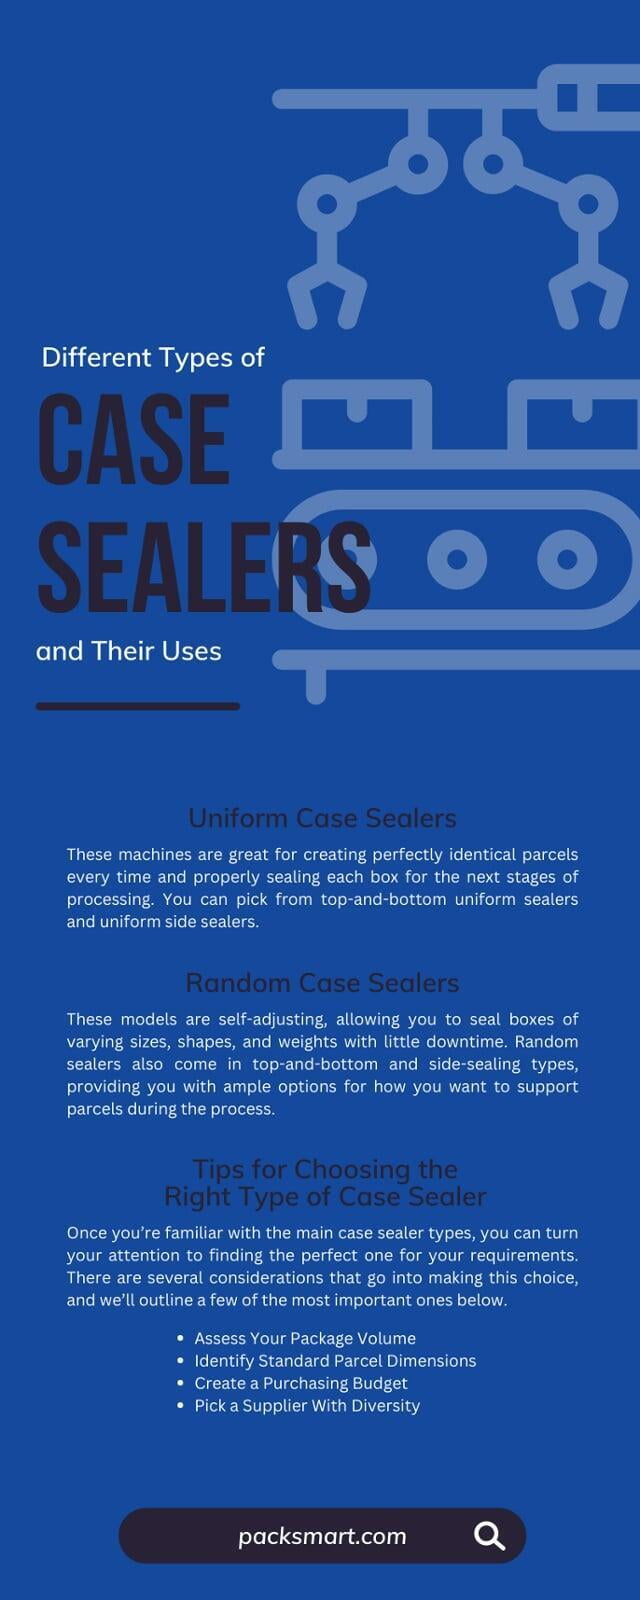 Different Types of Case Sealers and Their Uses